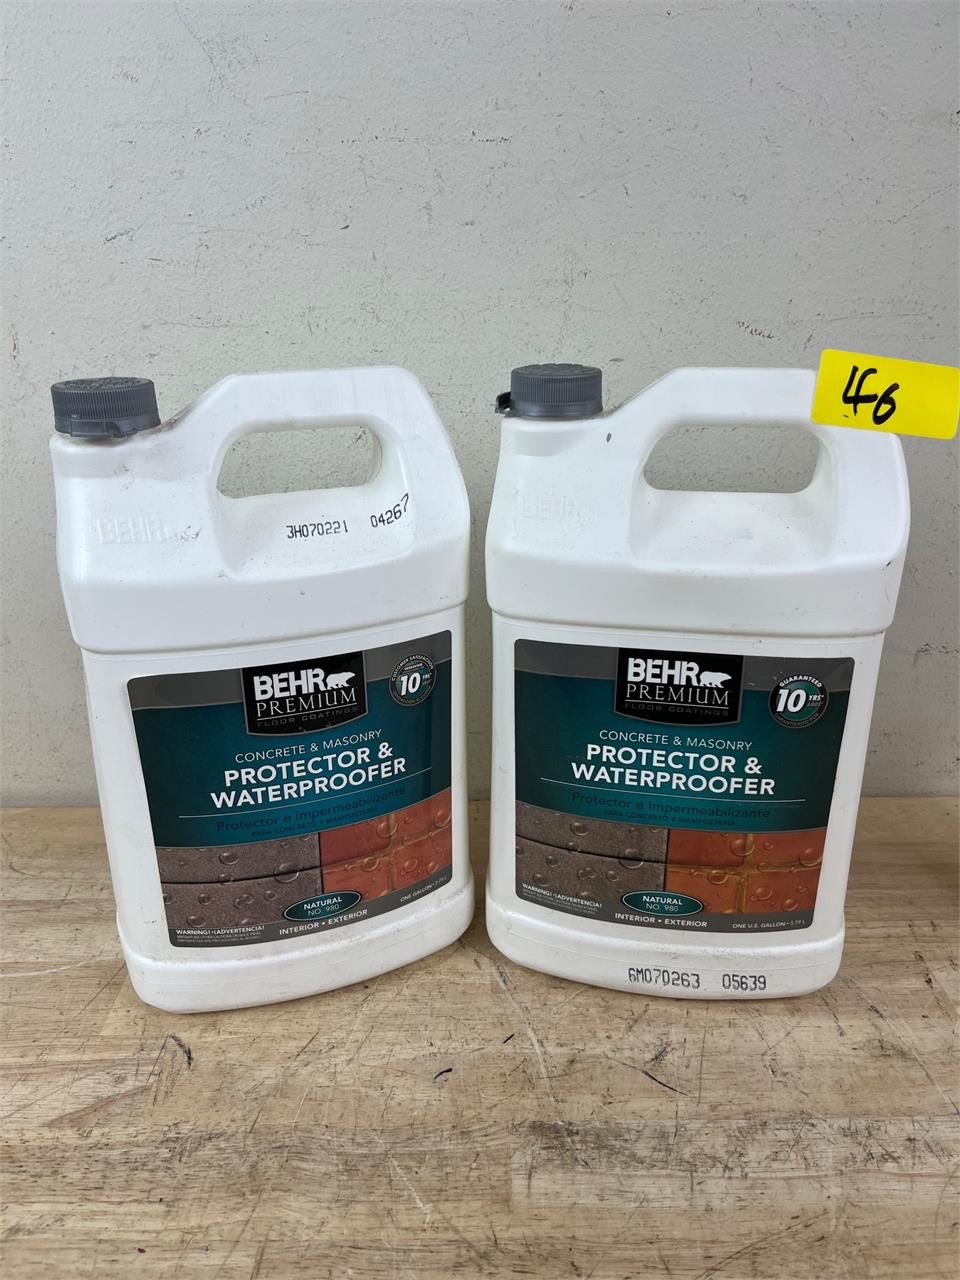 2 Gallons of Behr Concrete Waterproofer New